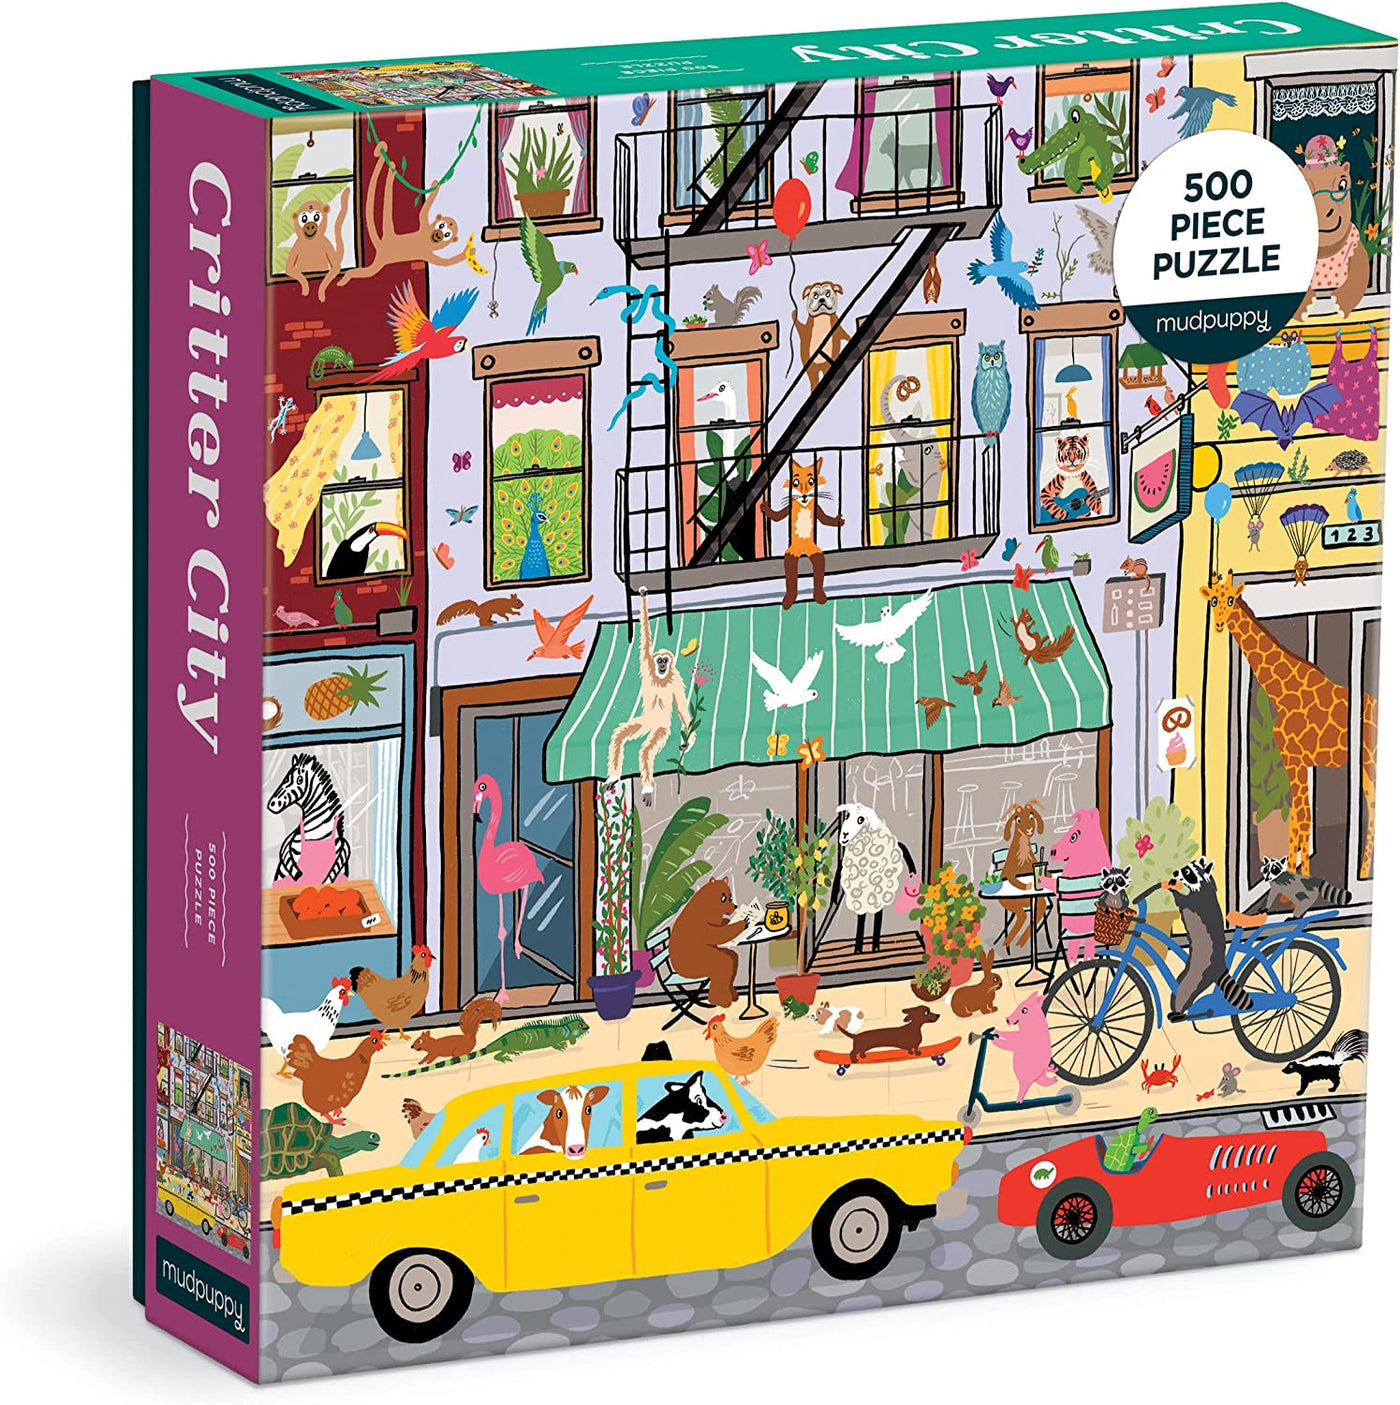 Critter City - Family Puzzle 500-Piece Jigsaw Puzzle